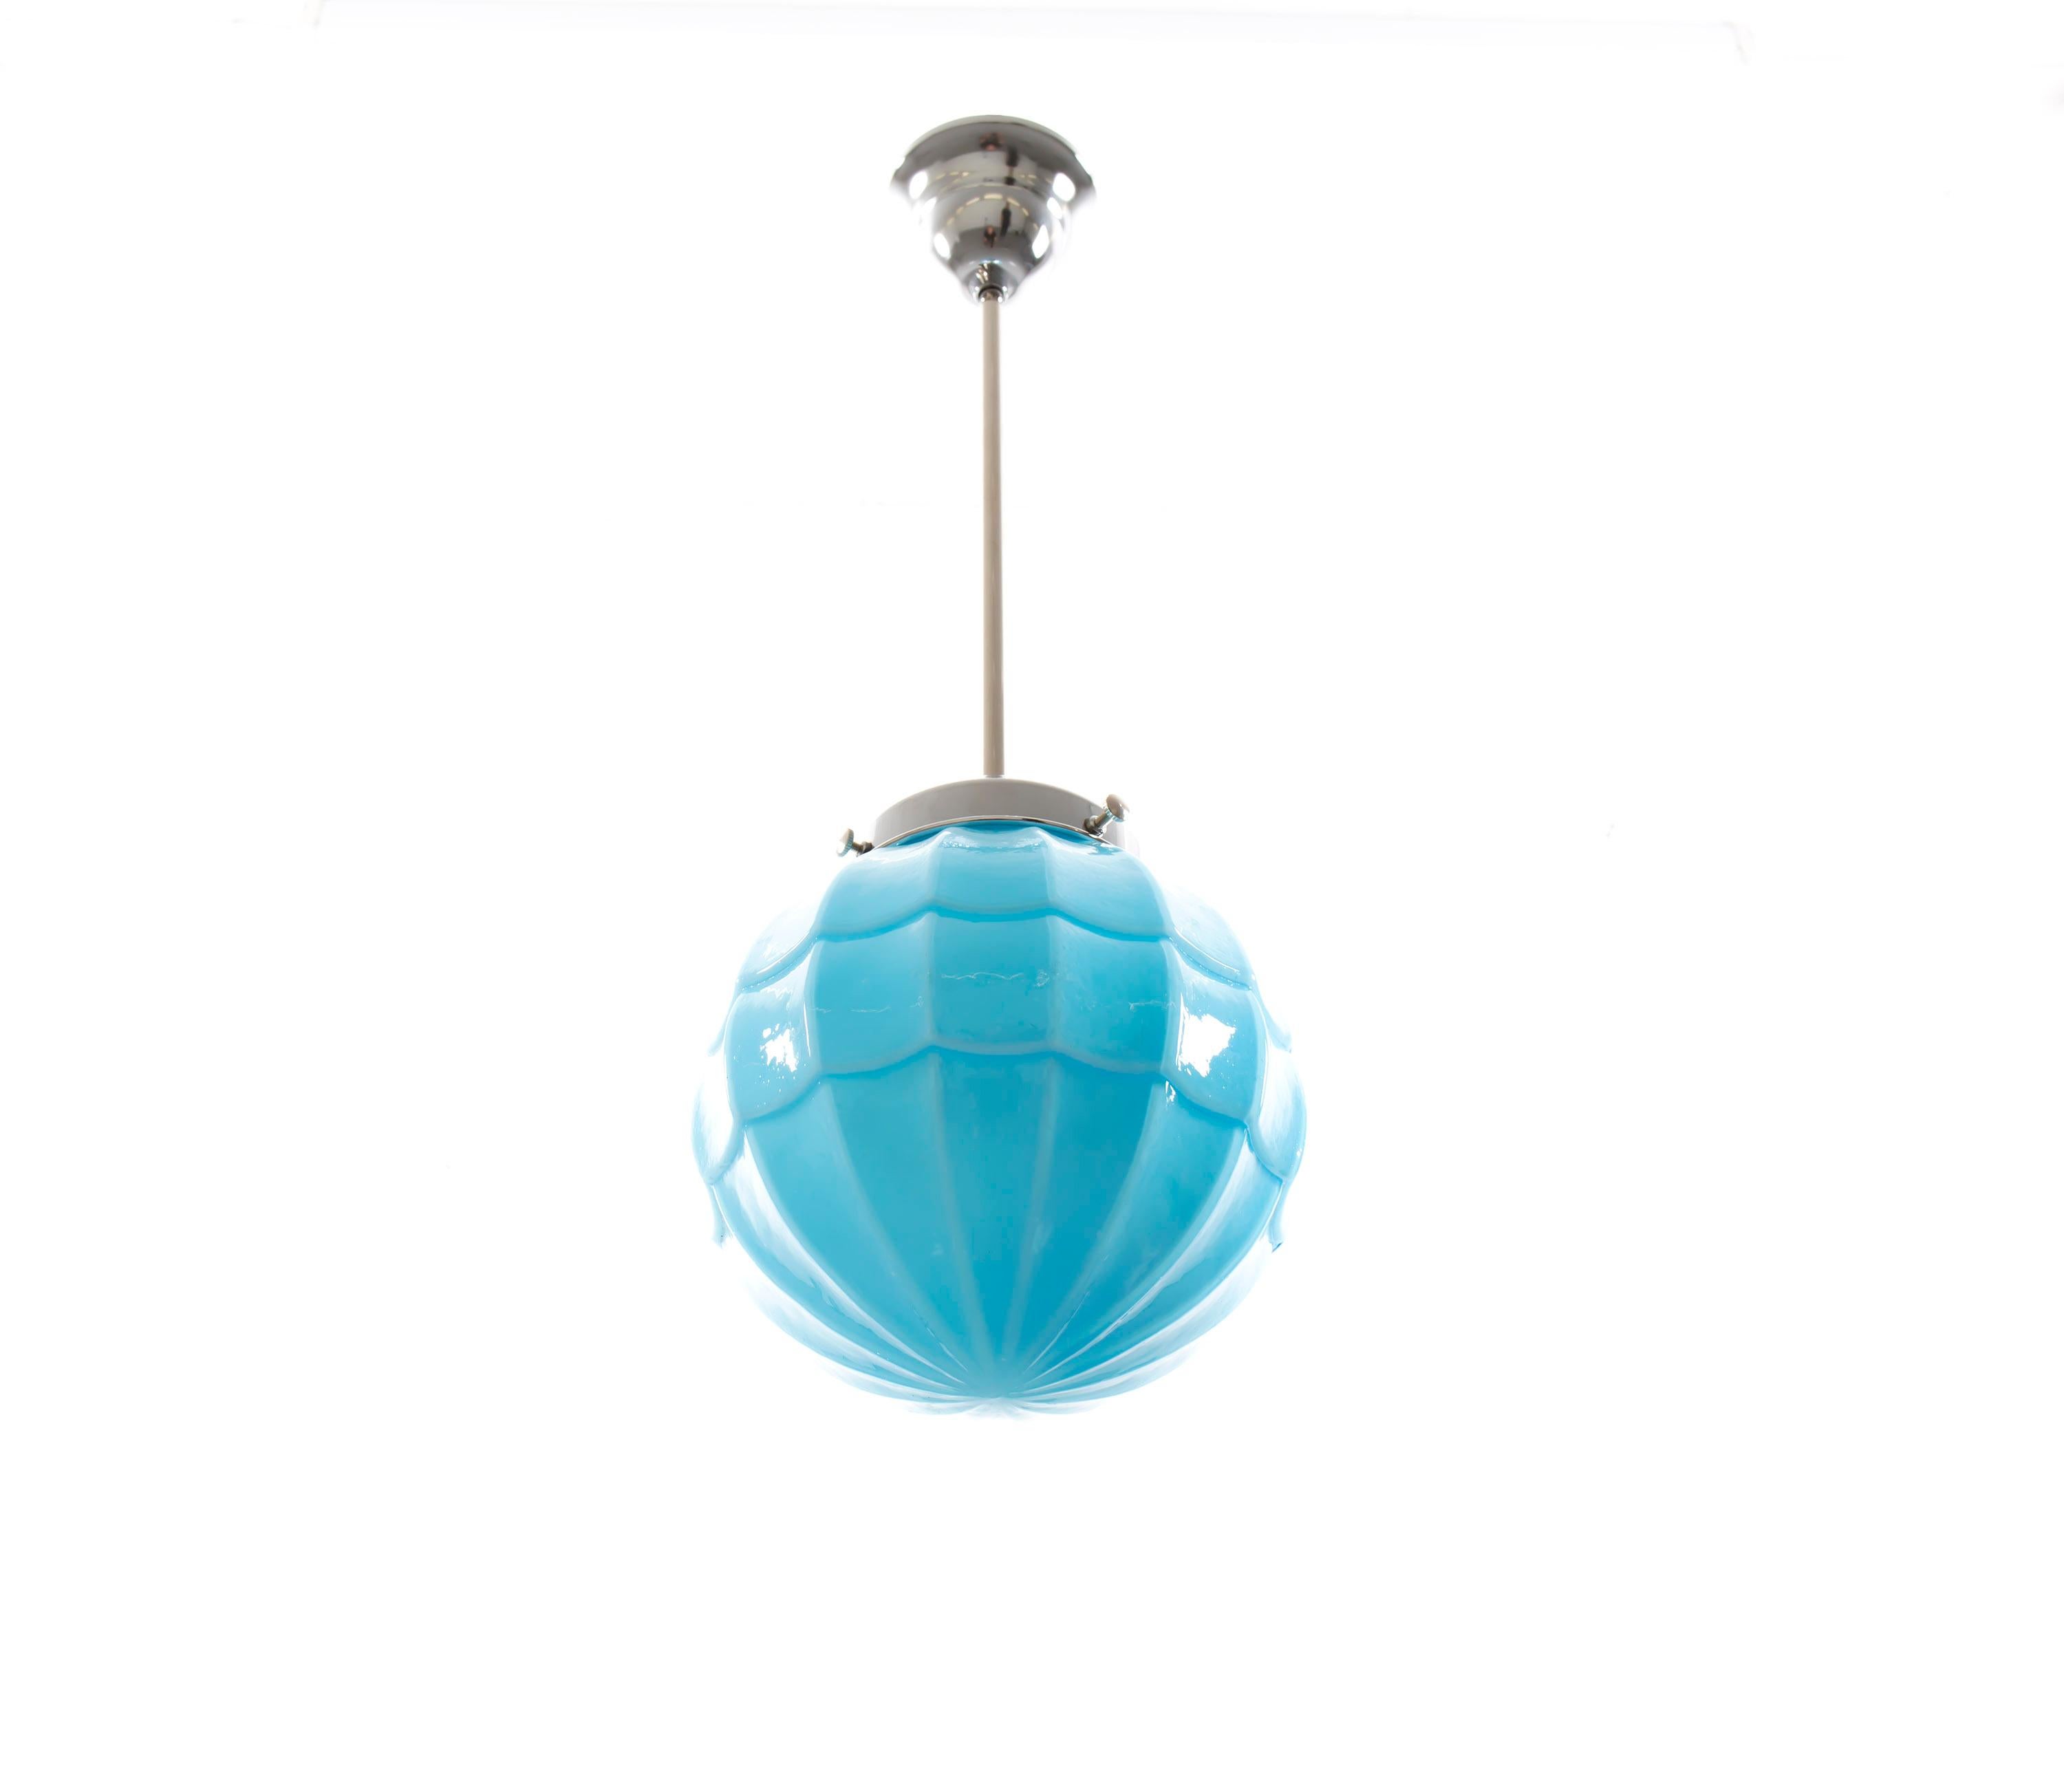 Mid-20th Century Scandinavian Functionalist Ceiling Light, Norway, 1950 For Sale